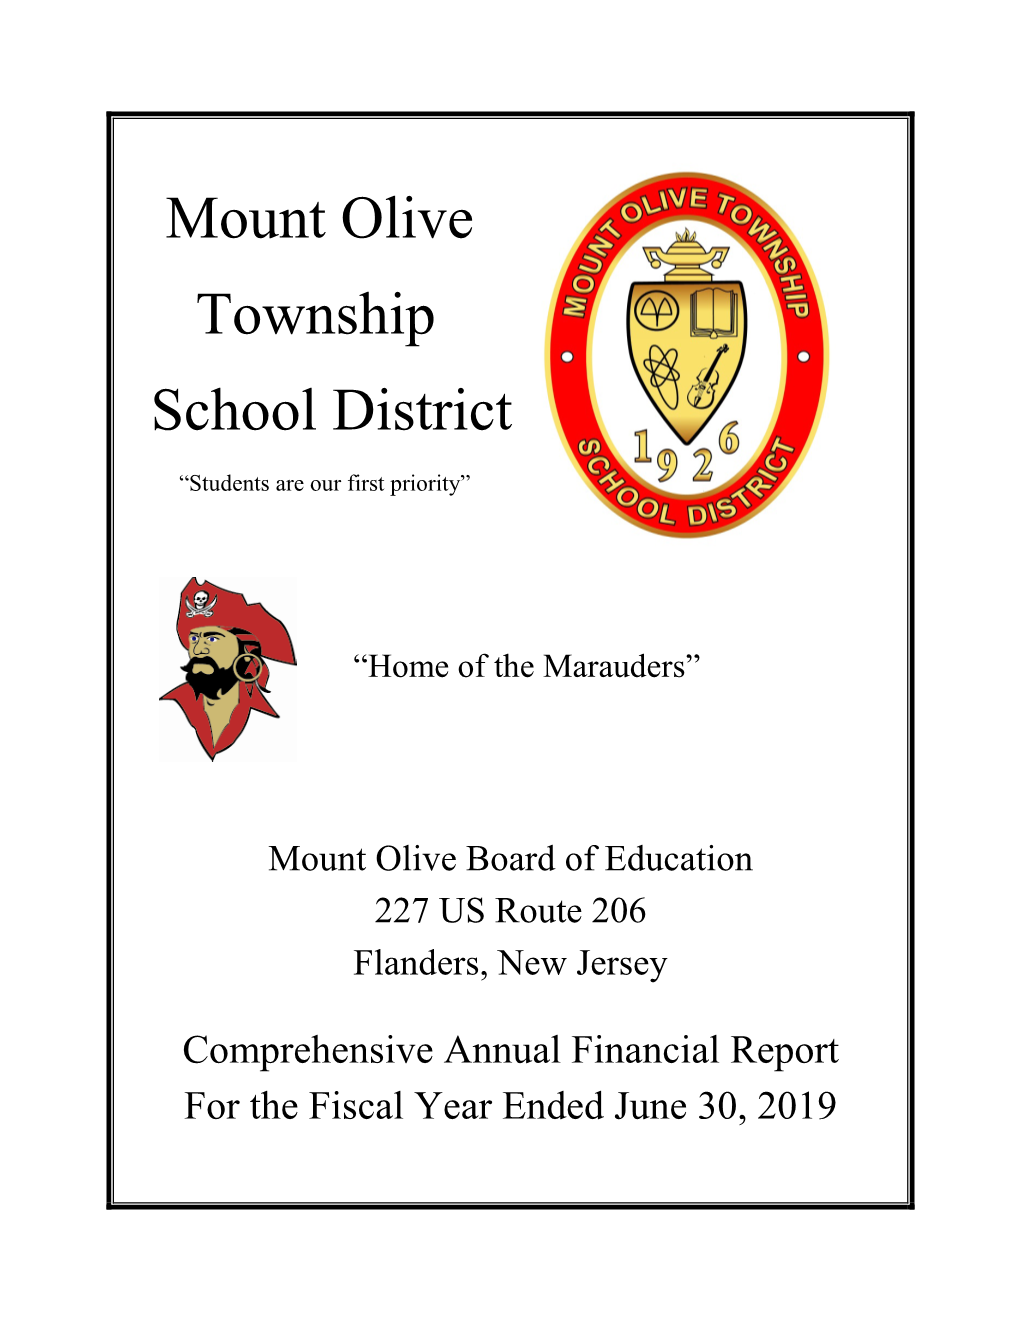 Mount Olive Township School District “Students Are Our First Priority”